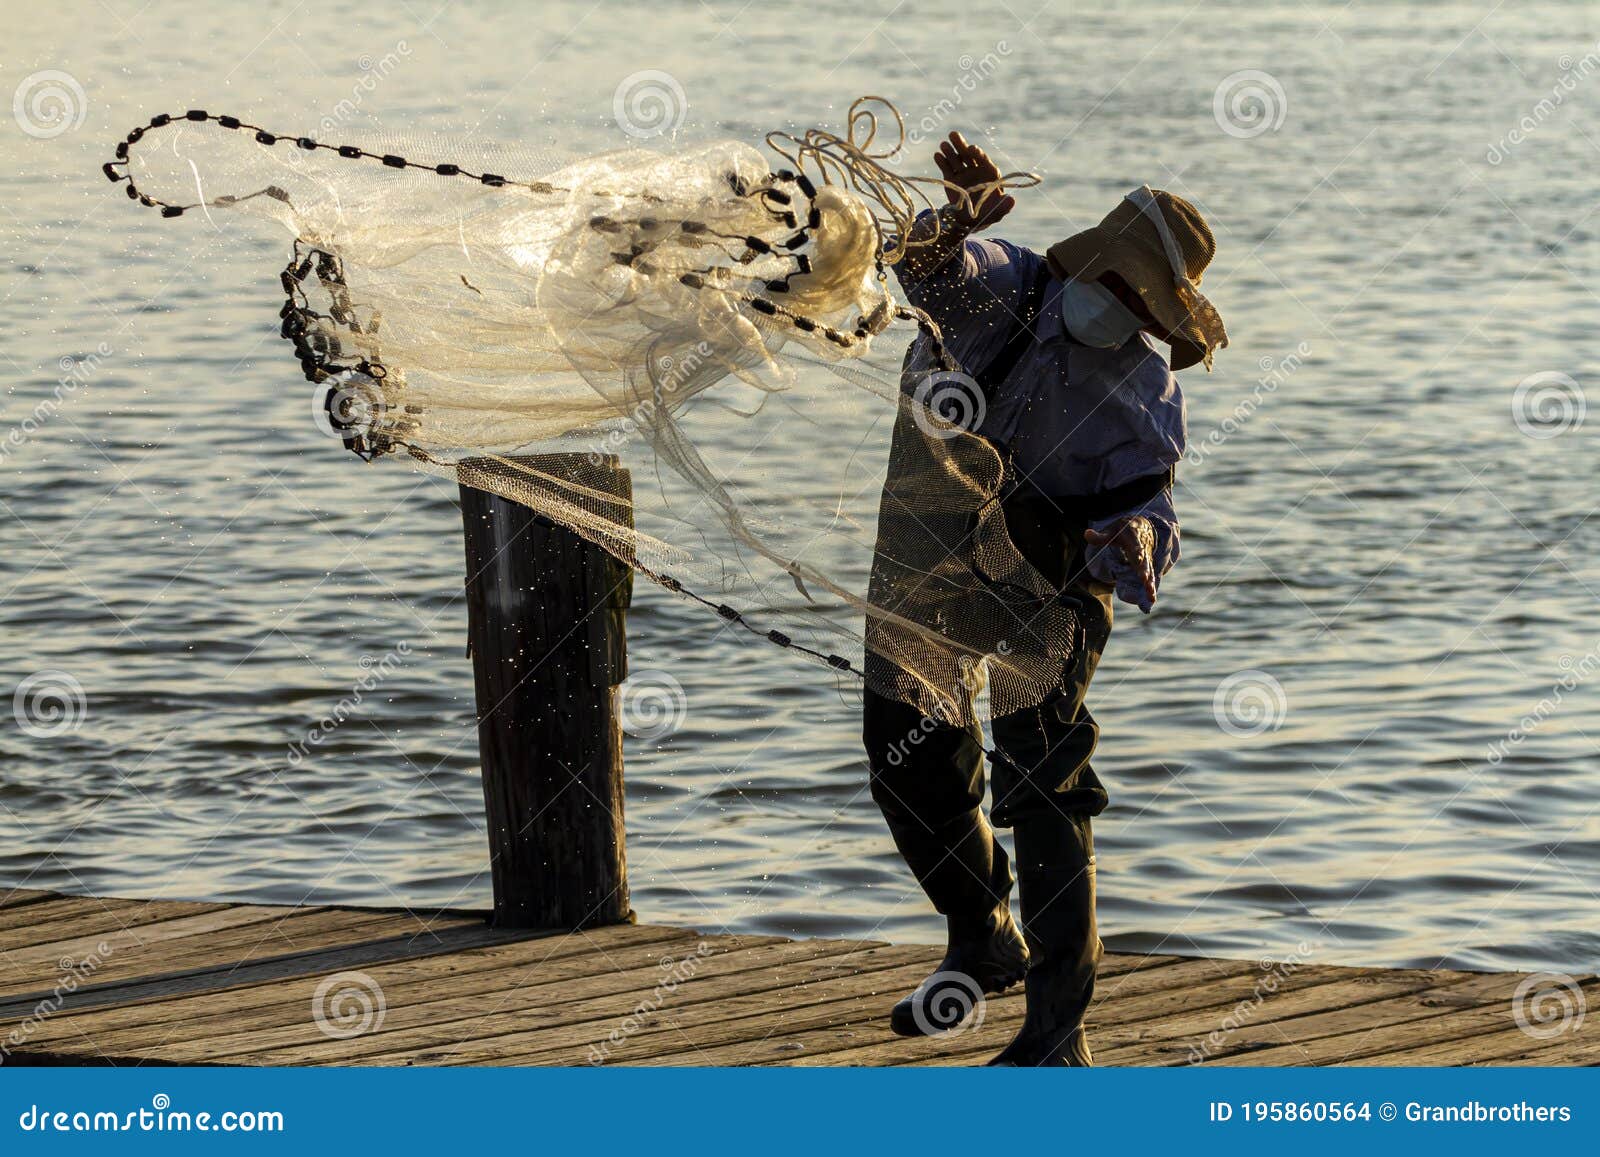 https://thumbs.dreamstime.com/z/fisherman-wearing-face-mask-casting-fishing-net-fisherman-wearing-overalls-boots-as-well-as-bucket-hat-throwing-195860564.jpg